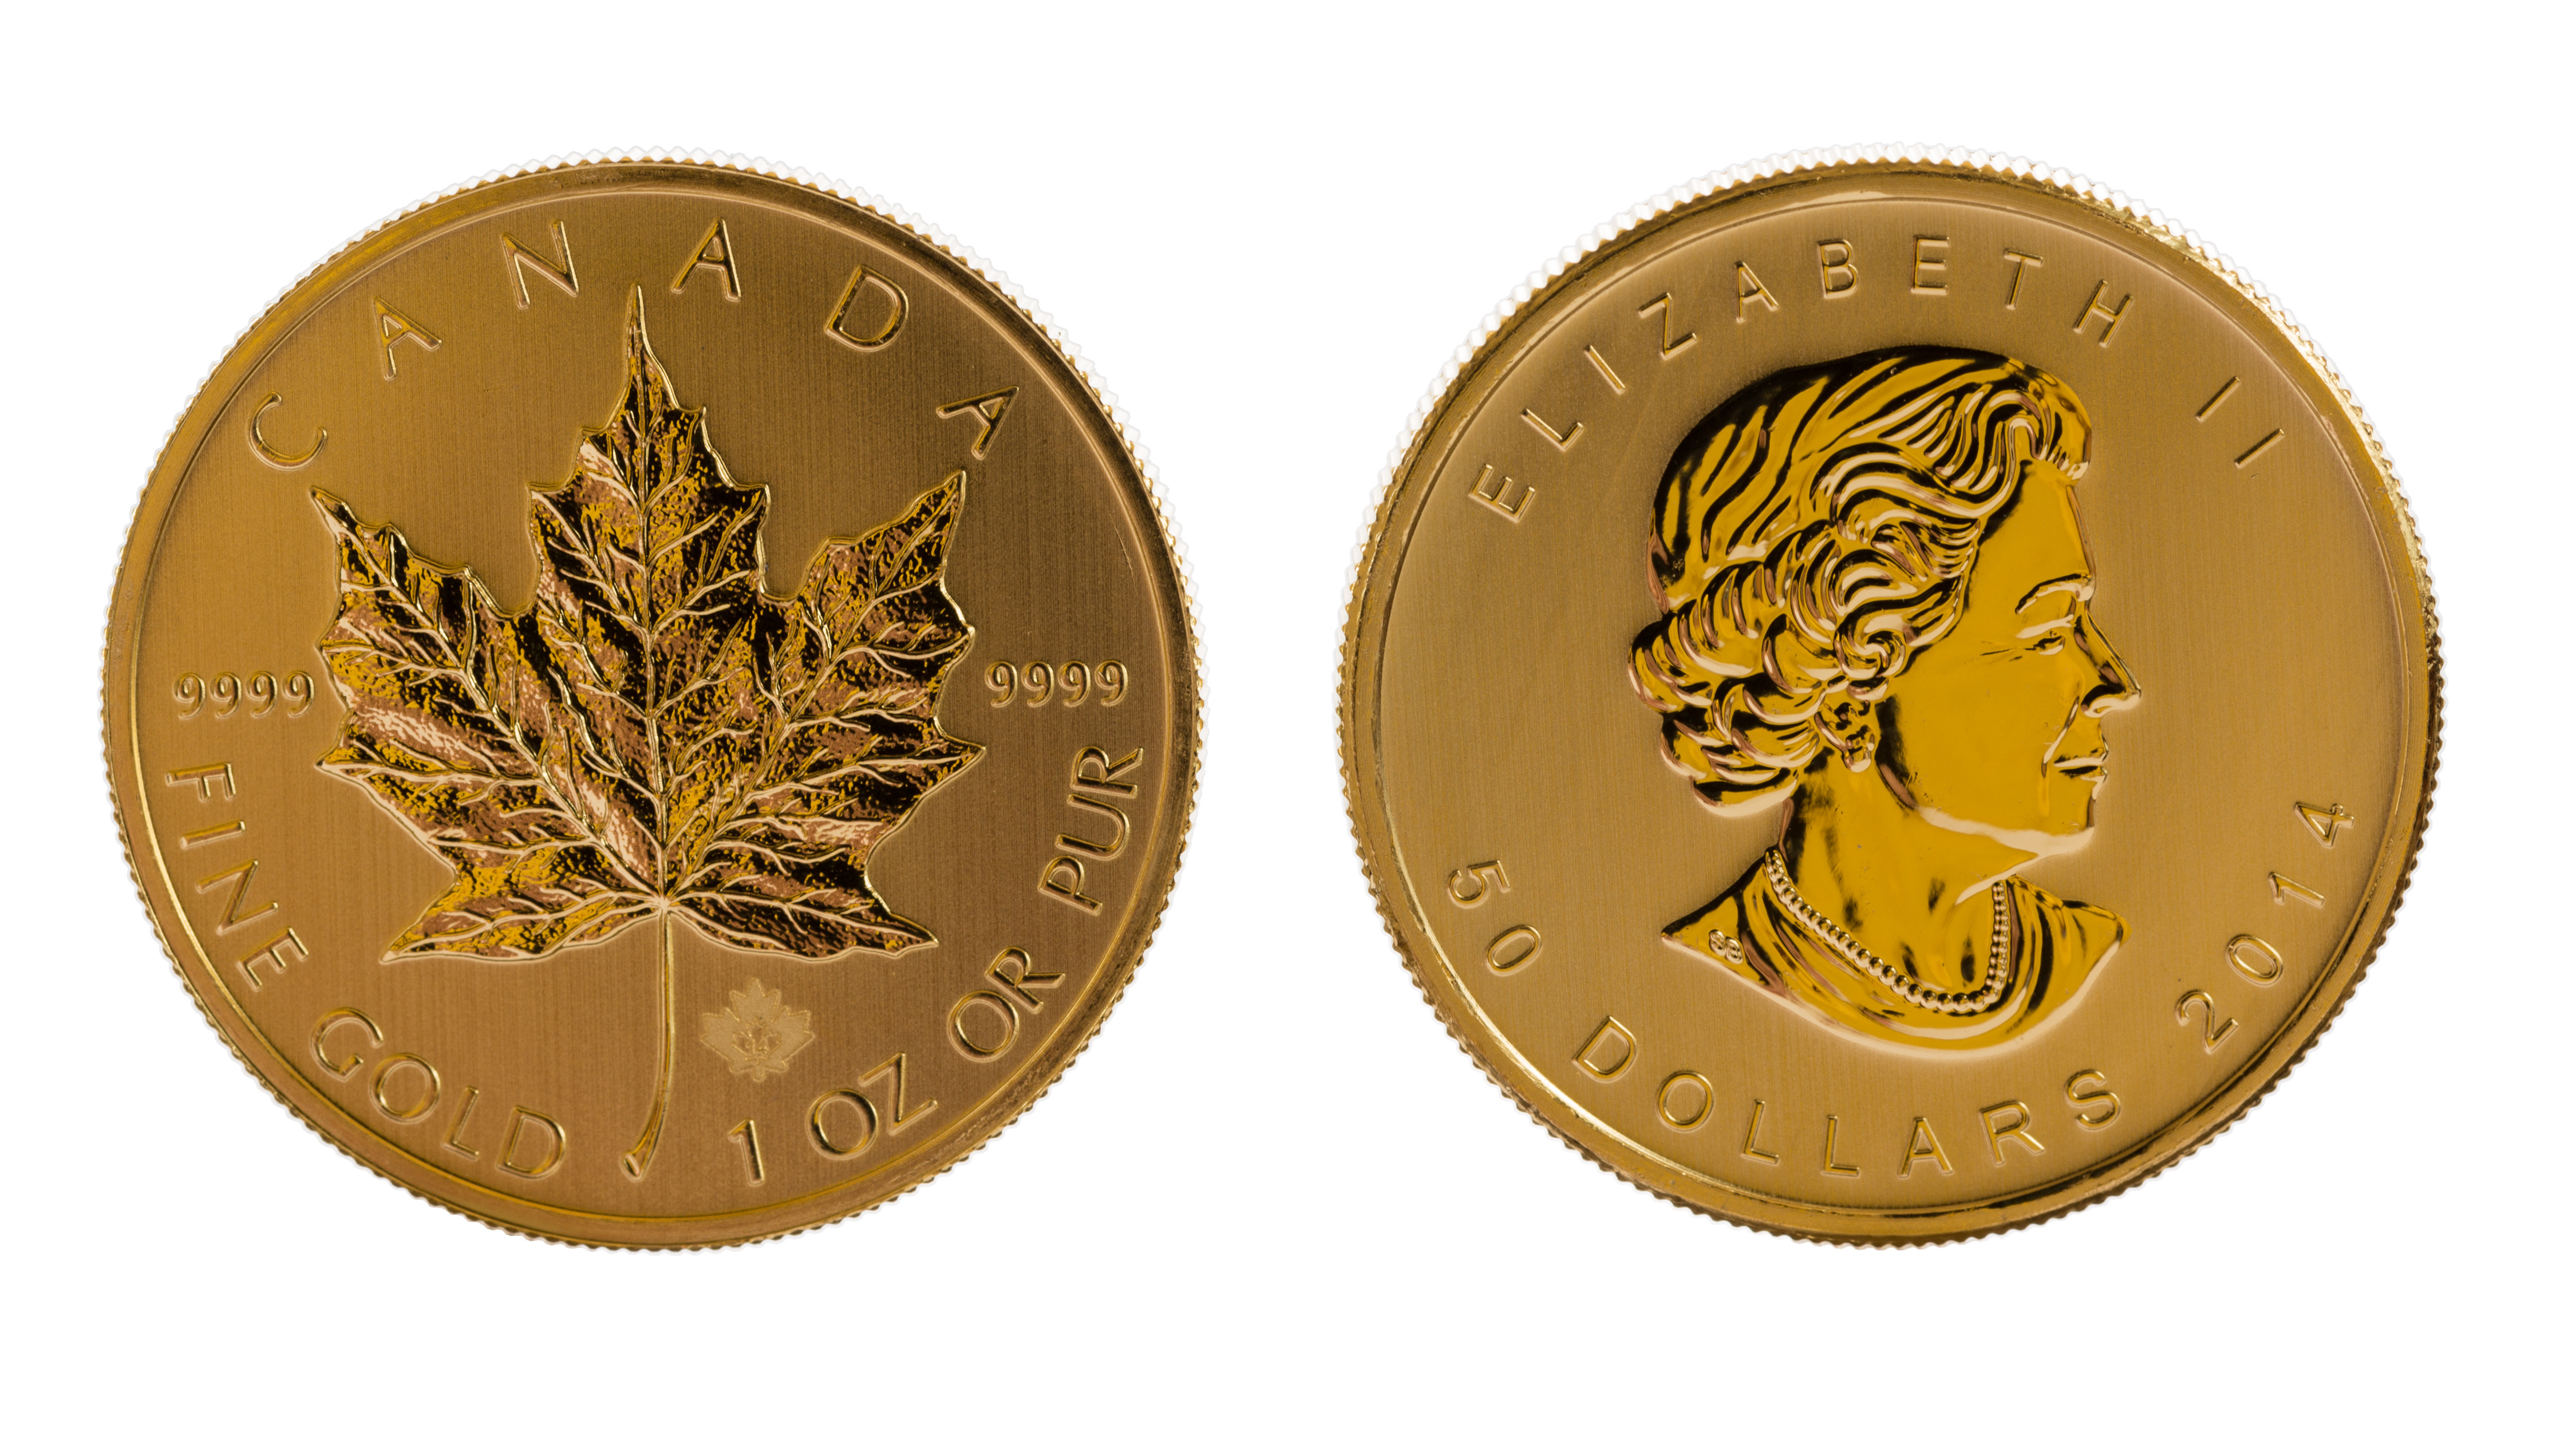 1 Ounce Gold Canadian Maple